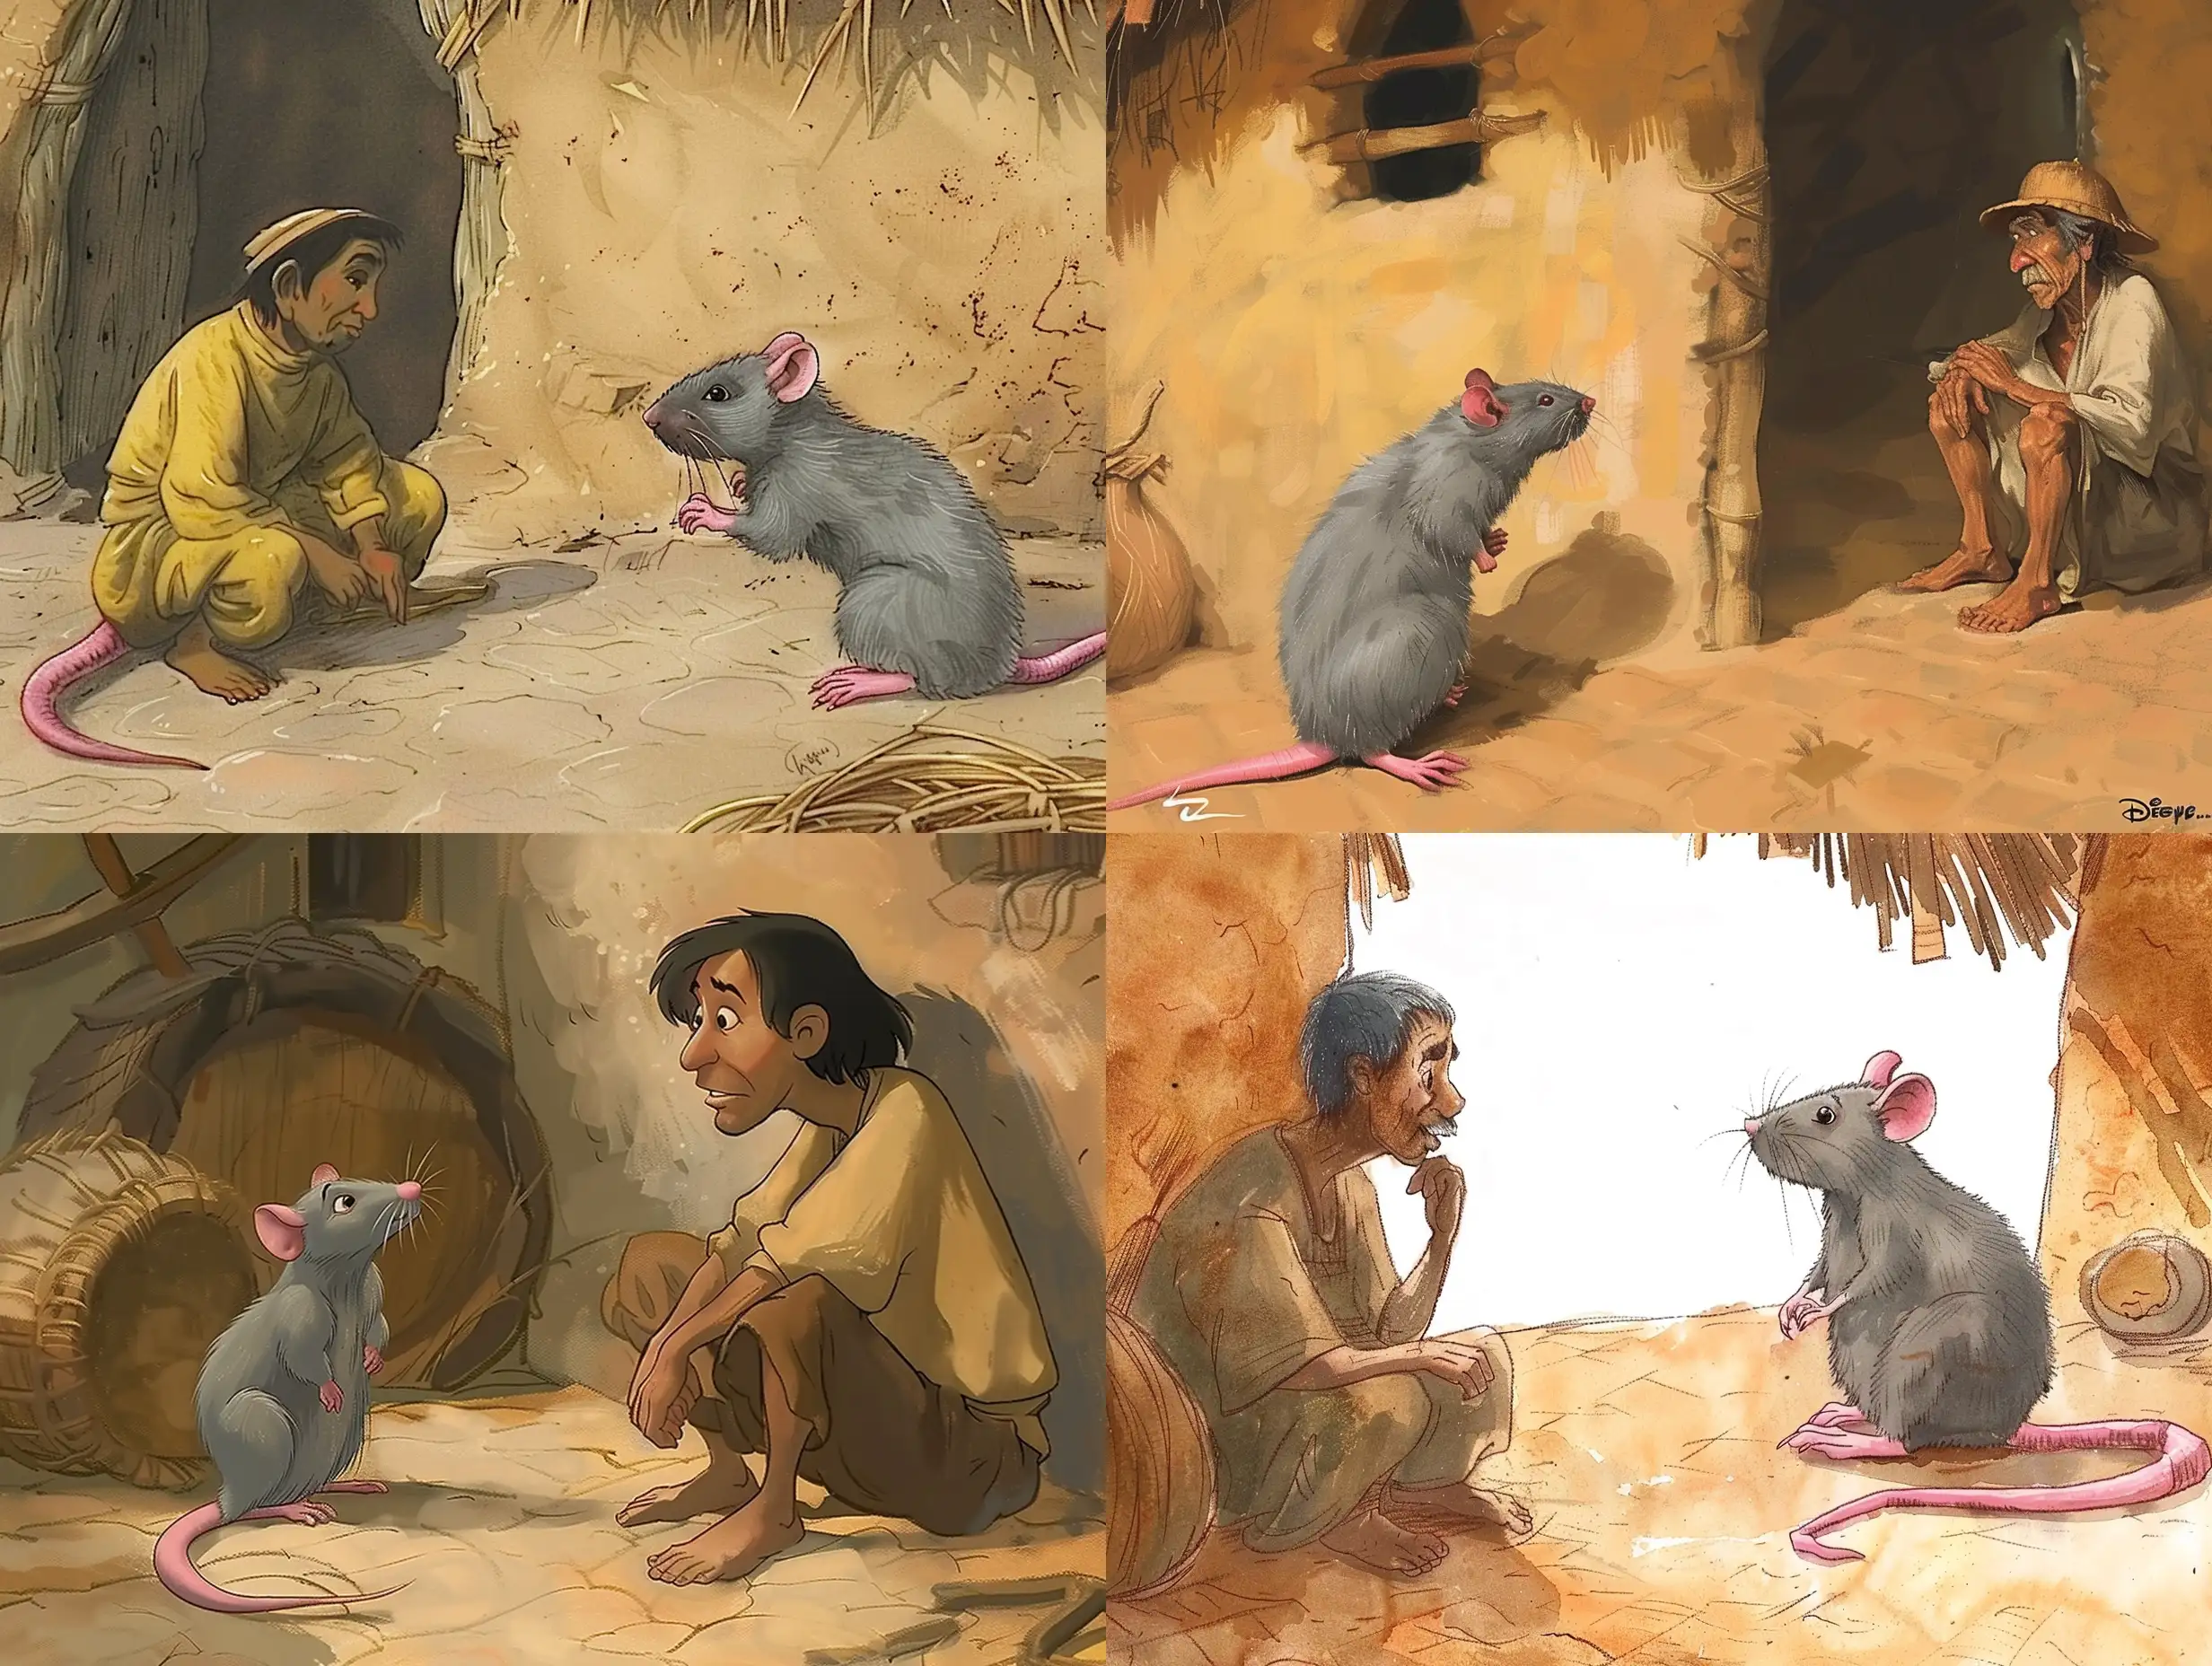 Whimsical-Encounter-Indonesian-Peasant-and-Sly-Gray-Rat-with-Pink-Tail